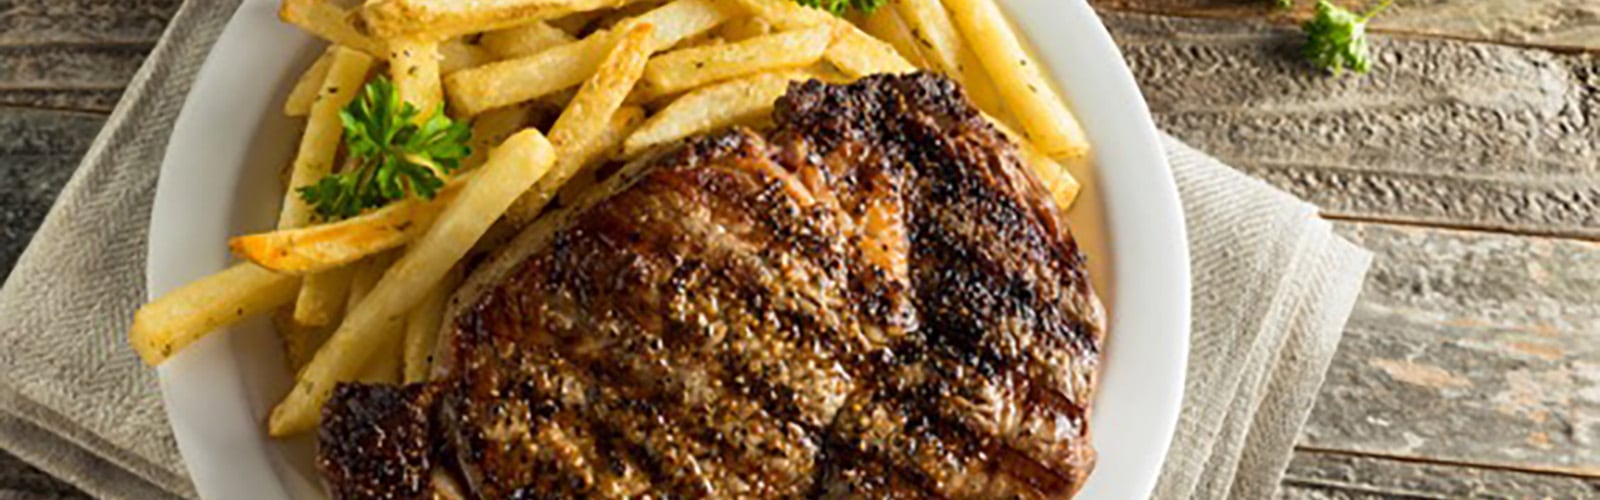 hearty-homemade-steak-and-french-fries-picture-id657627186-copy